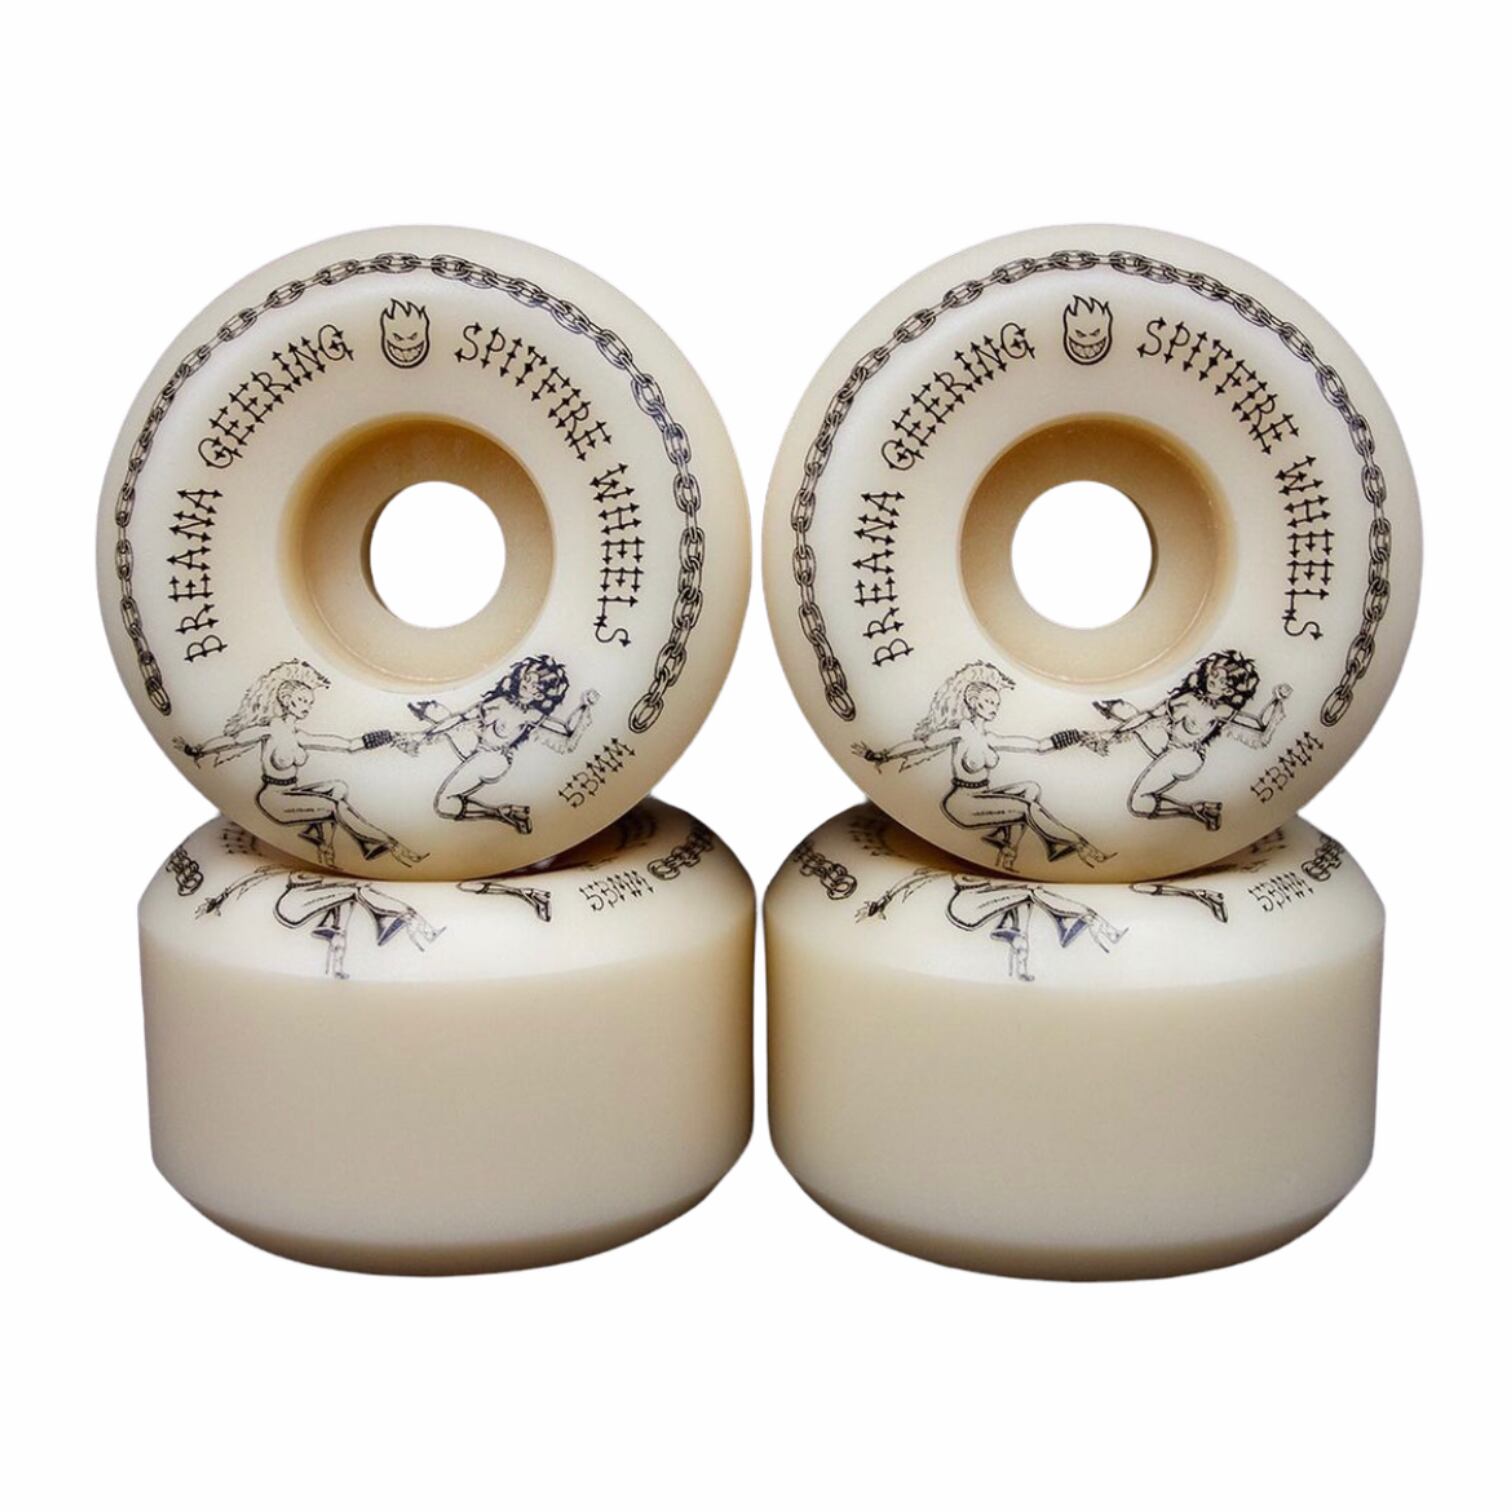 SPITFIRE WHEELS 【F4 CONICAL FULL - BREANA GEERING】